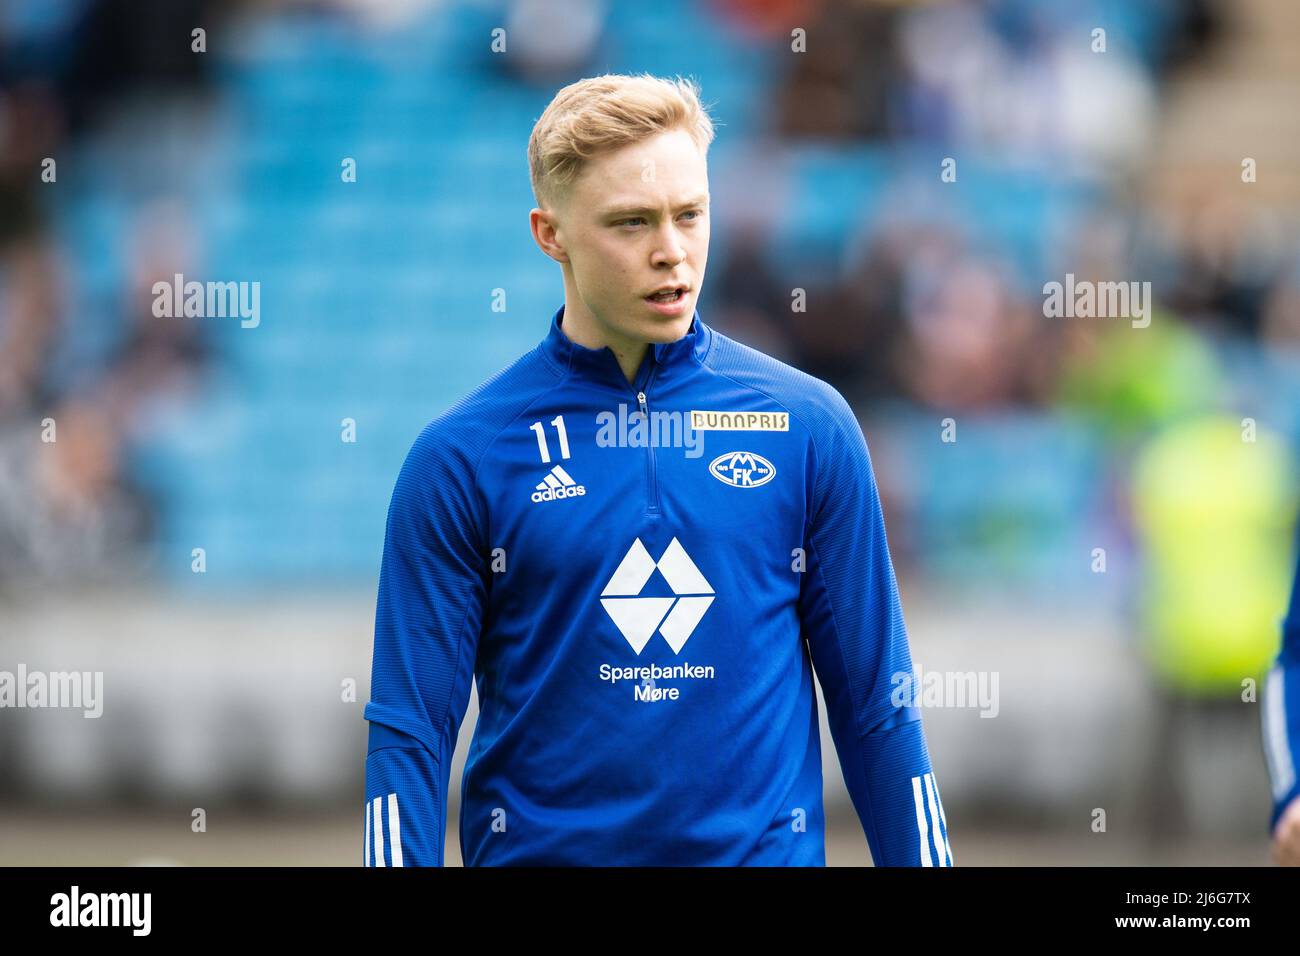 Oslo, Norway. 01st, May 2022. Ola Brynhildsen (11) of Molde is warming up before the Norwegian Cup final, the NM Menn final, between Bodoe/Glimt and Molde at Ullevaal Stadion in Oslo. (Photo credit: Gonzales Photo - Jan-Erik Eriksen). Credit: Gonzales Photo/Alamy Live News Stock Photo